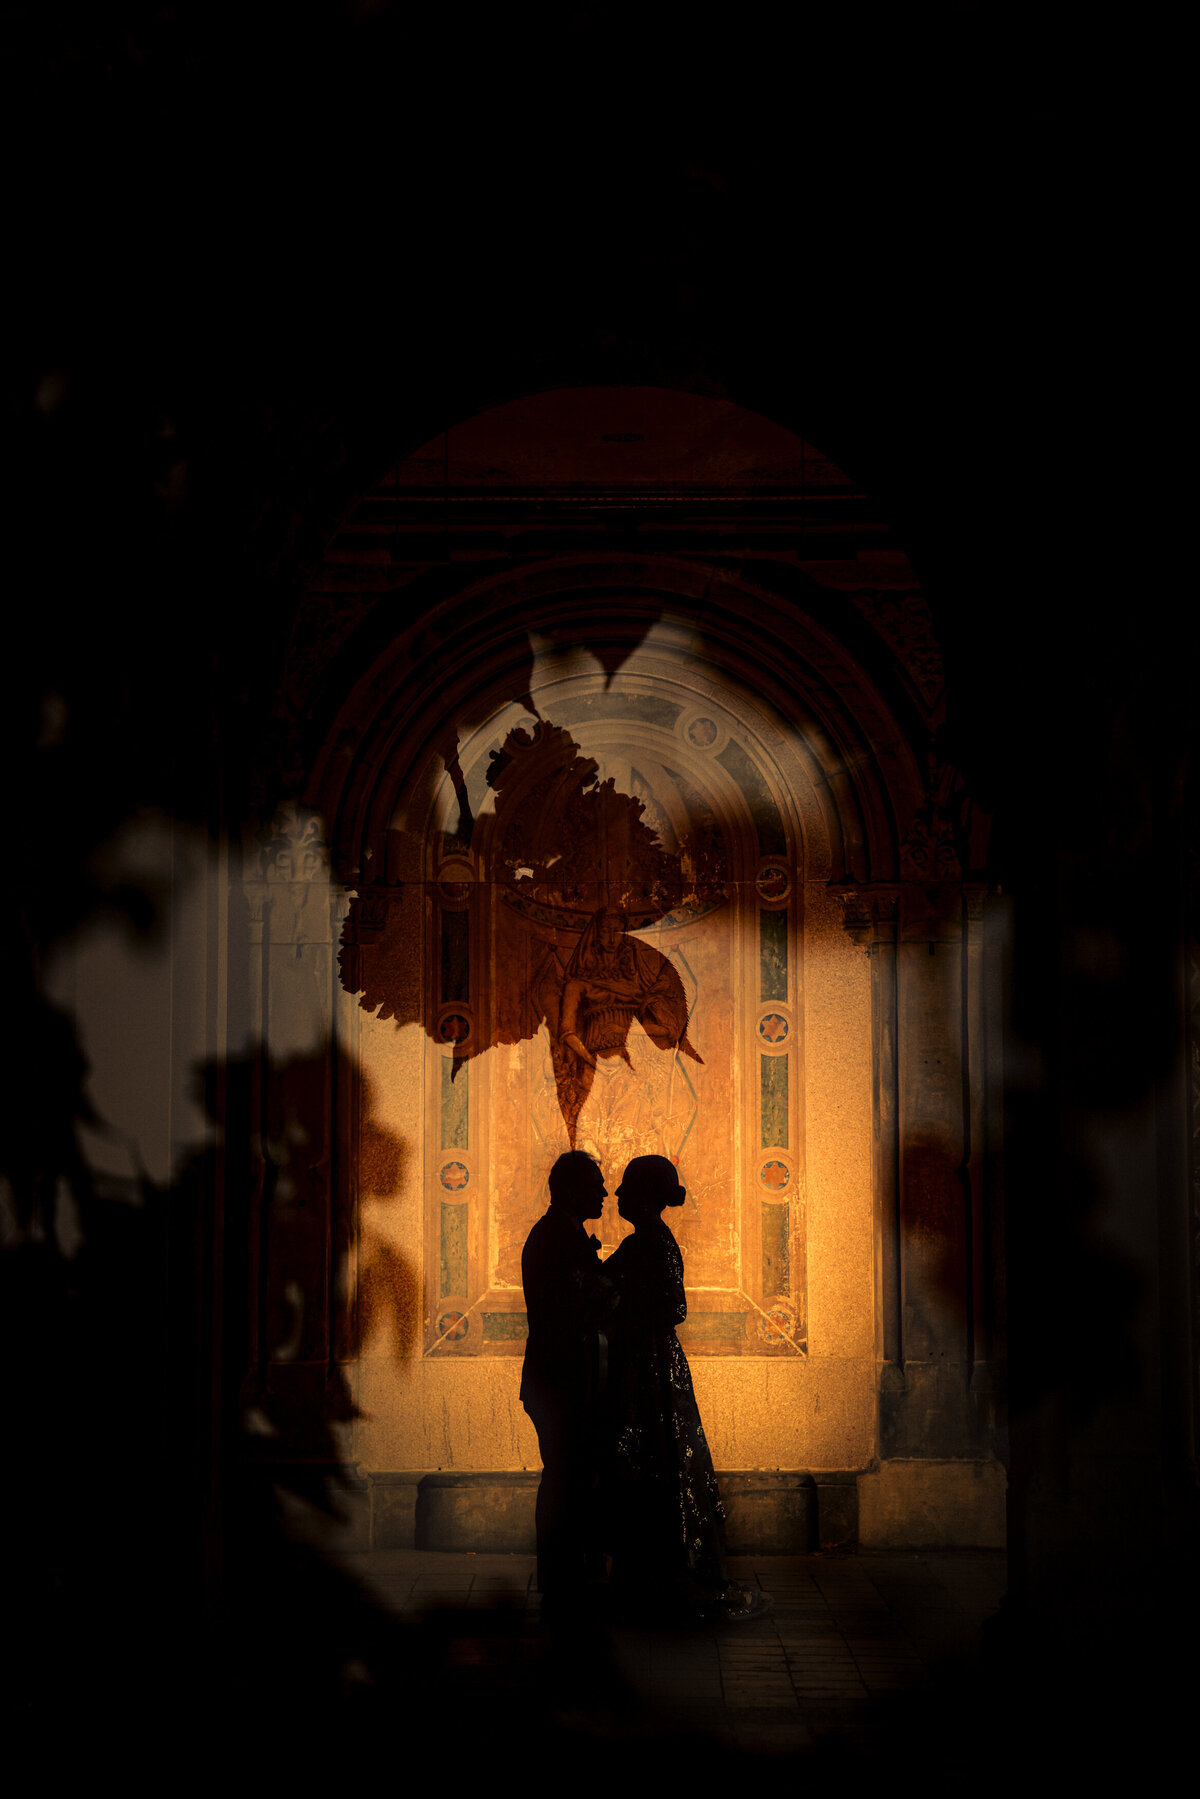 The silhouette of a couple as they are about to kiss.